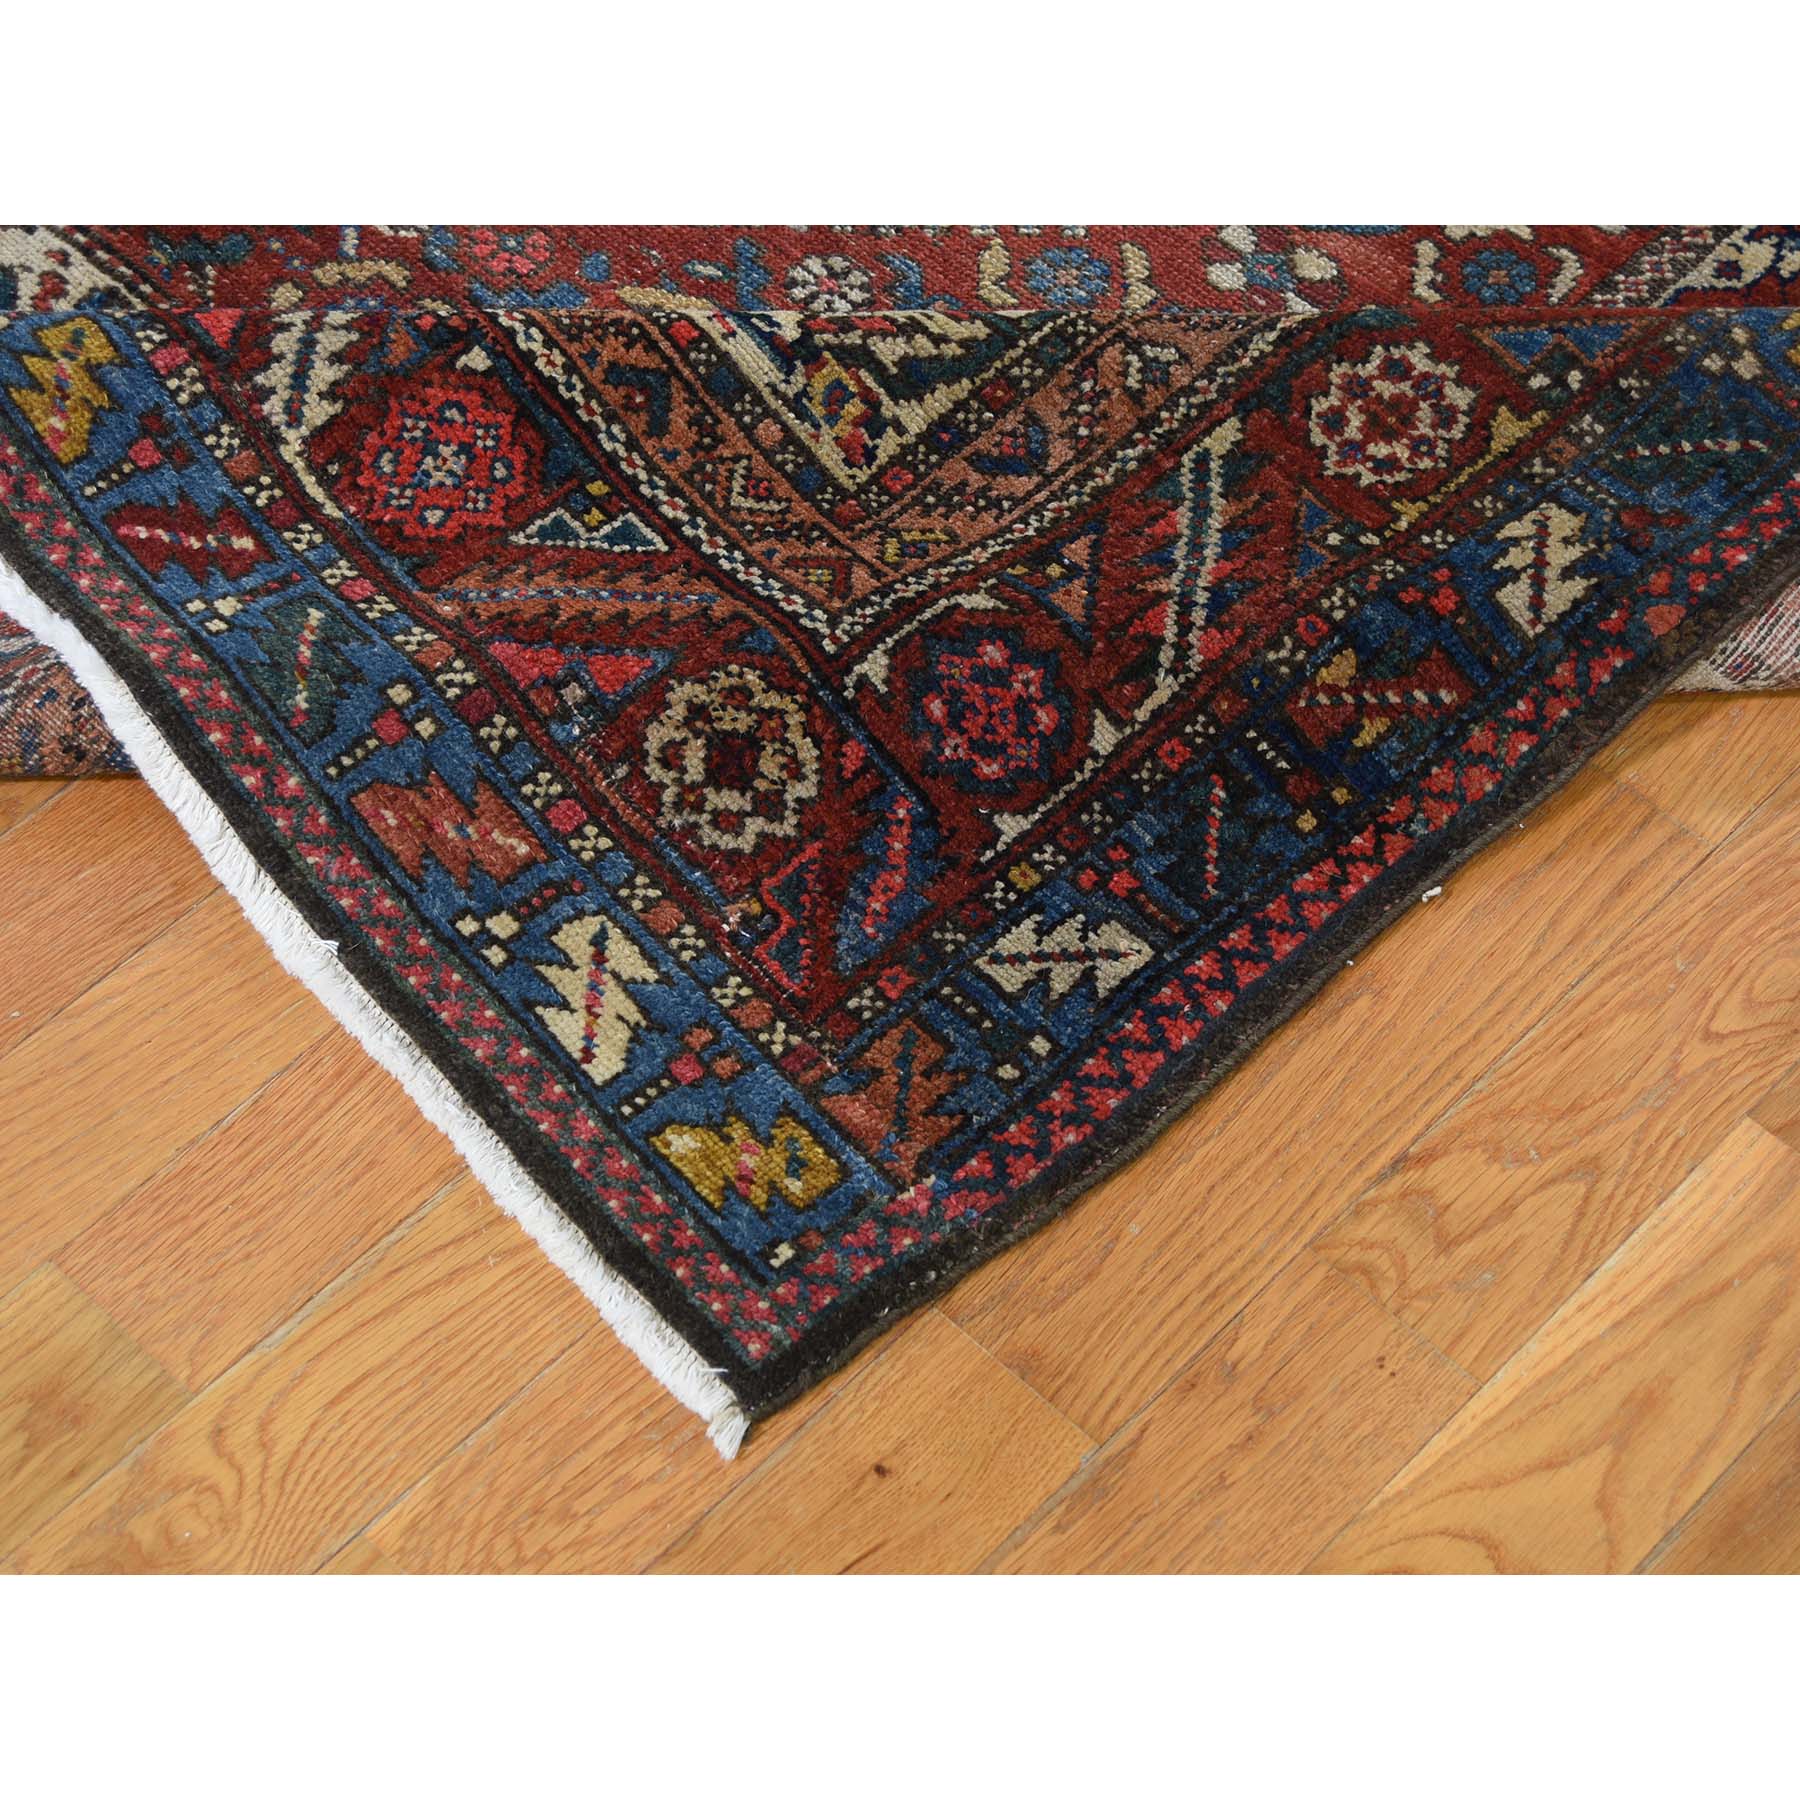 6'8"x12'8" Red Gallery Size Antique Persian Bakhtiari Good Con. Full Pile Pure Wool Hand Woven Oriental Rug 